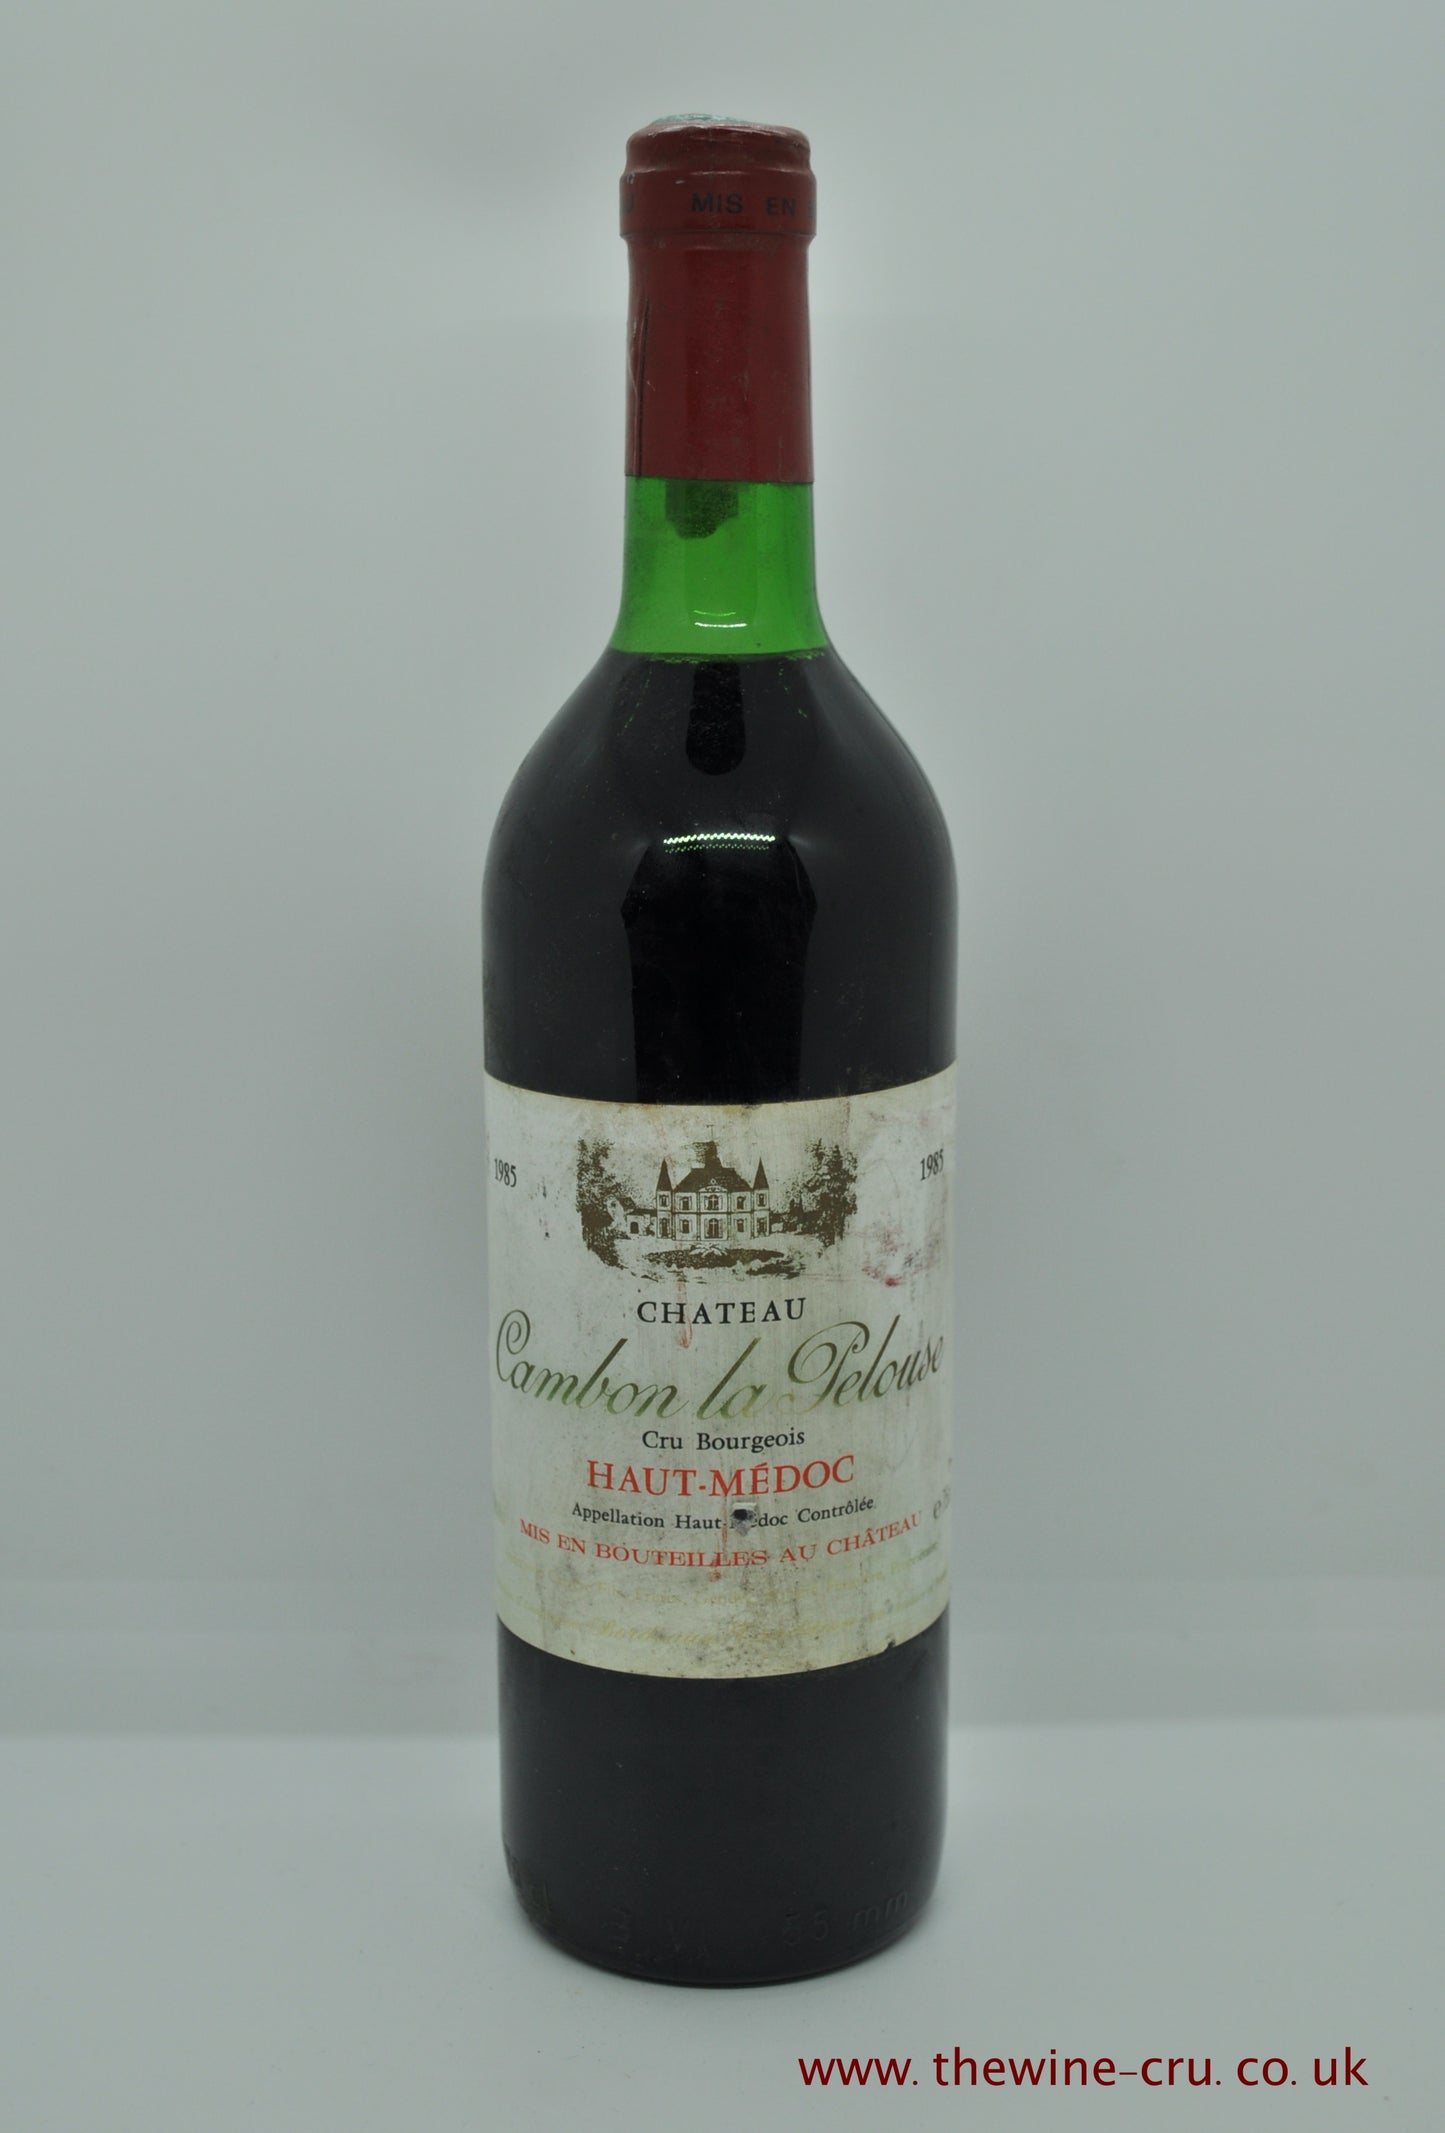 1985 vintage red wine. Chateau Cambon La Pelouse 1985. France Bordeaux. Immediate delivery. Free local delivery. Gift wrapping available.